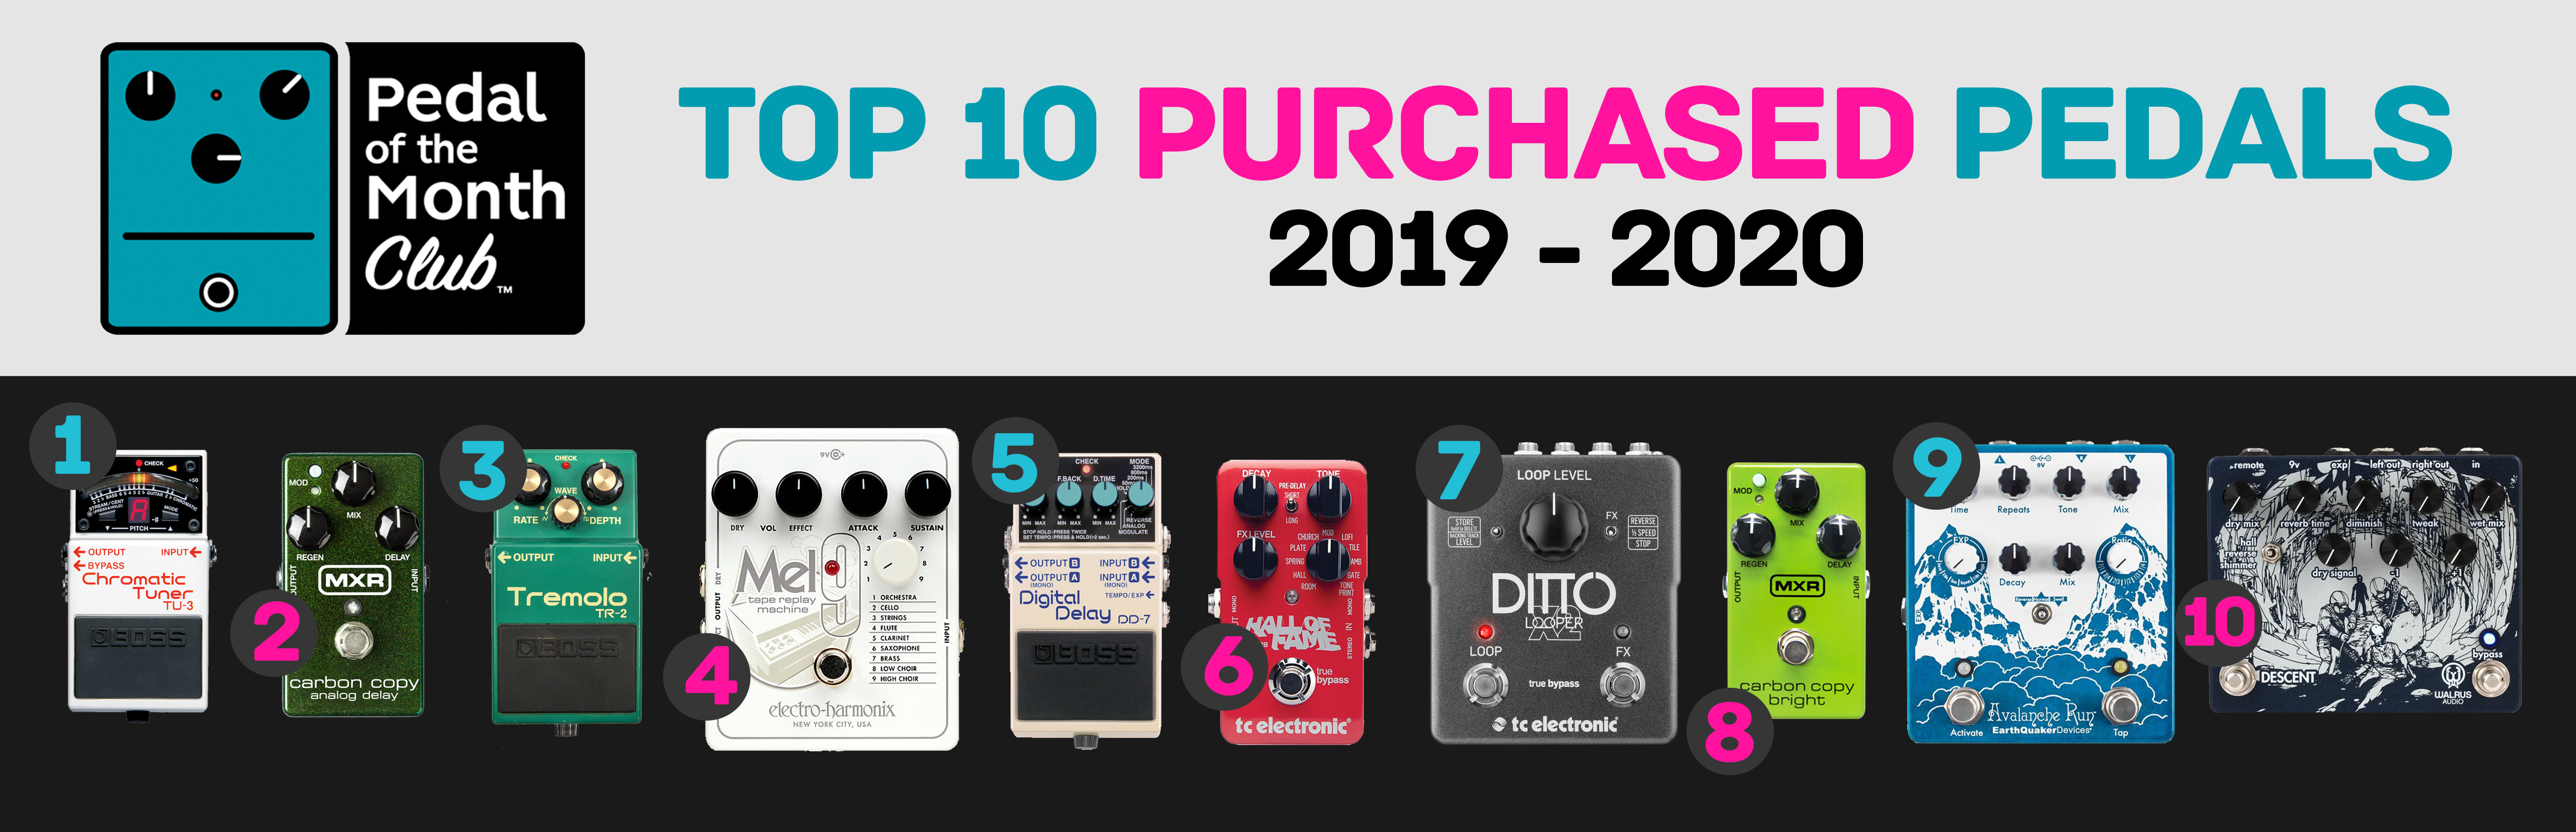 Greatest Hits of the Pedal of the Month Club Pedals Sale